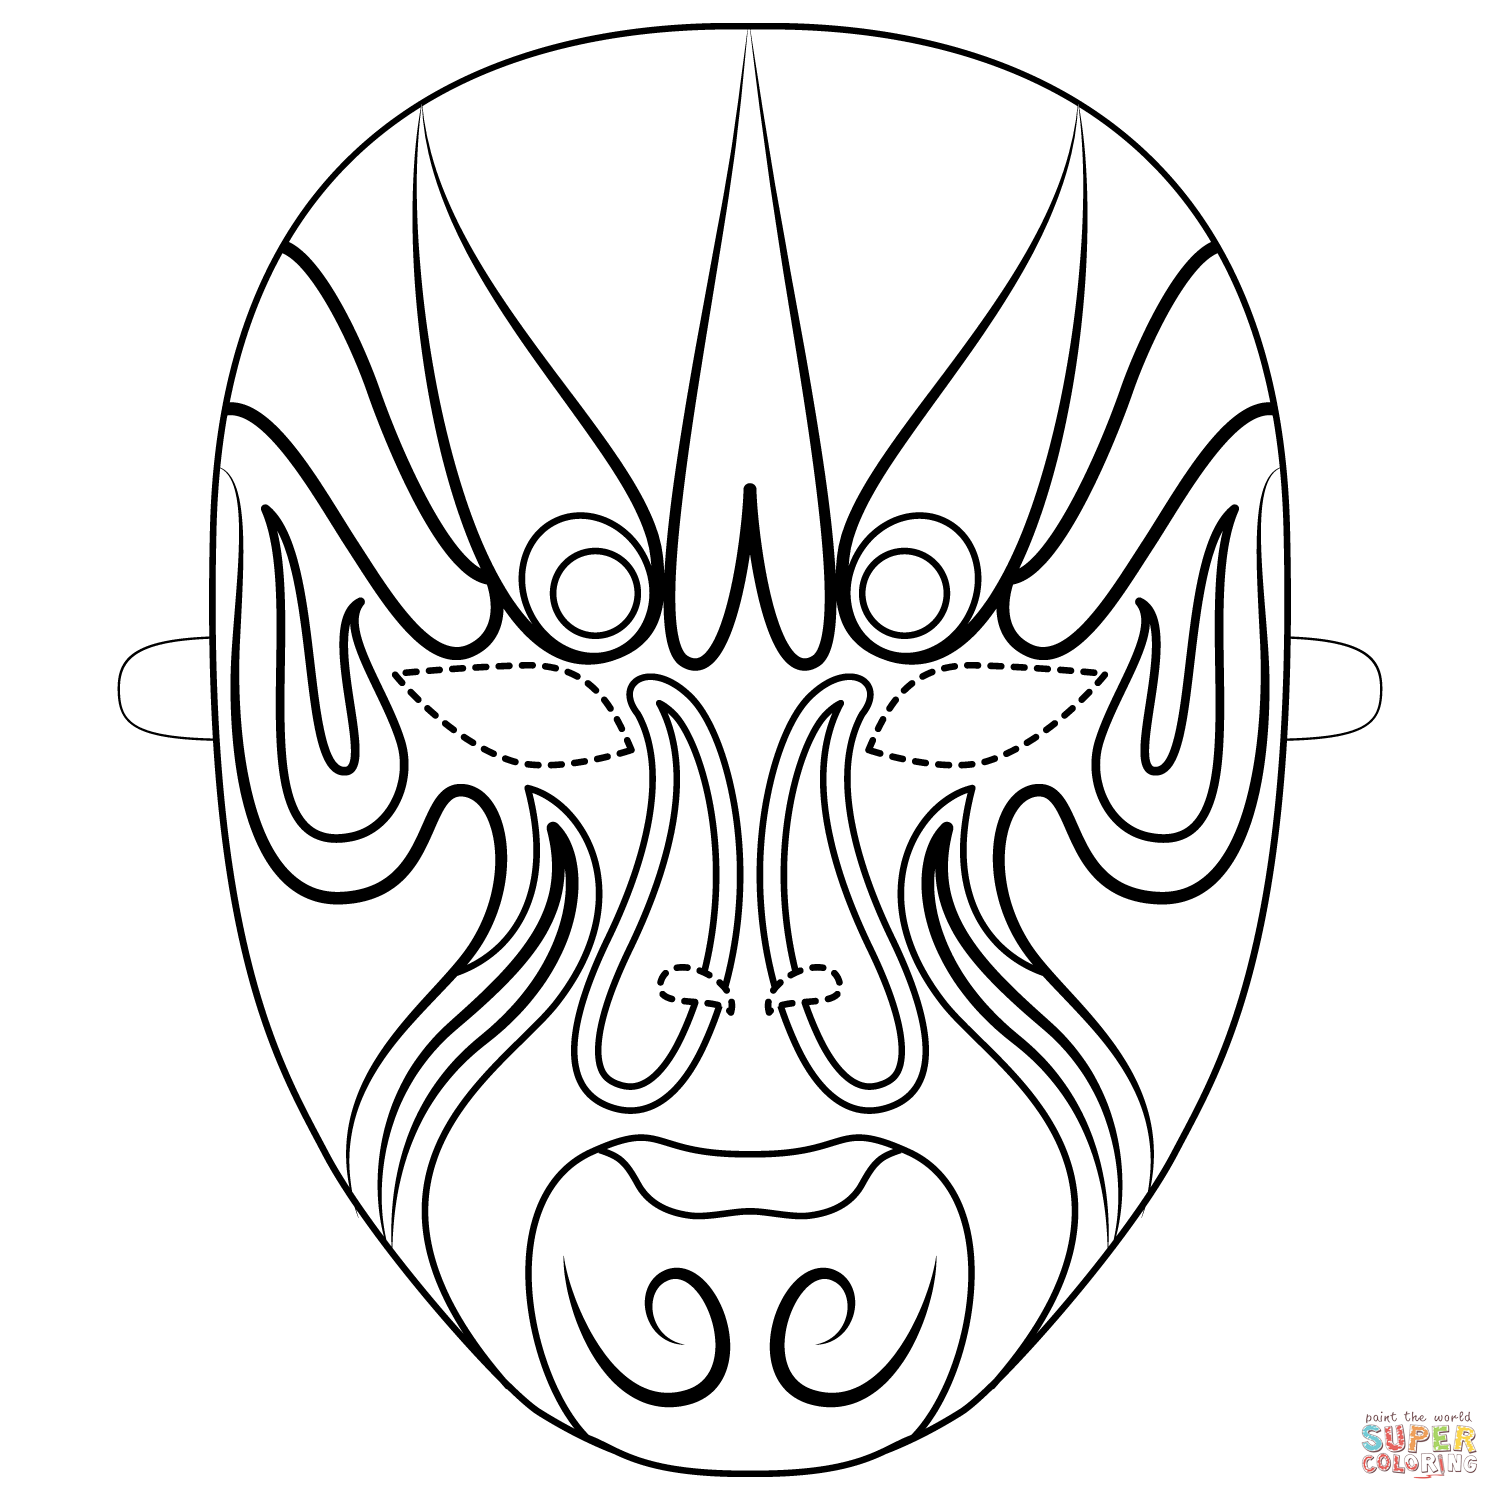 Chinese opera mask coloring page free printable coloring pages